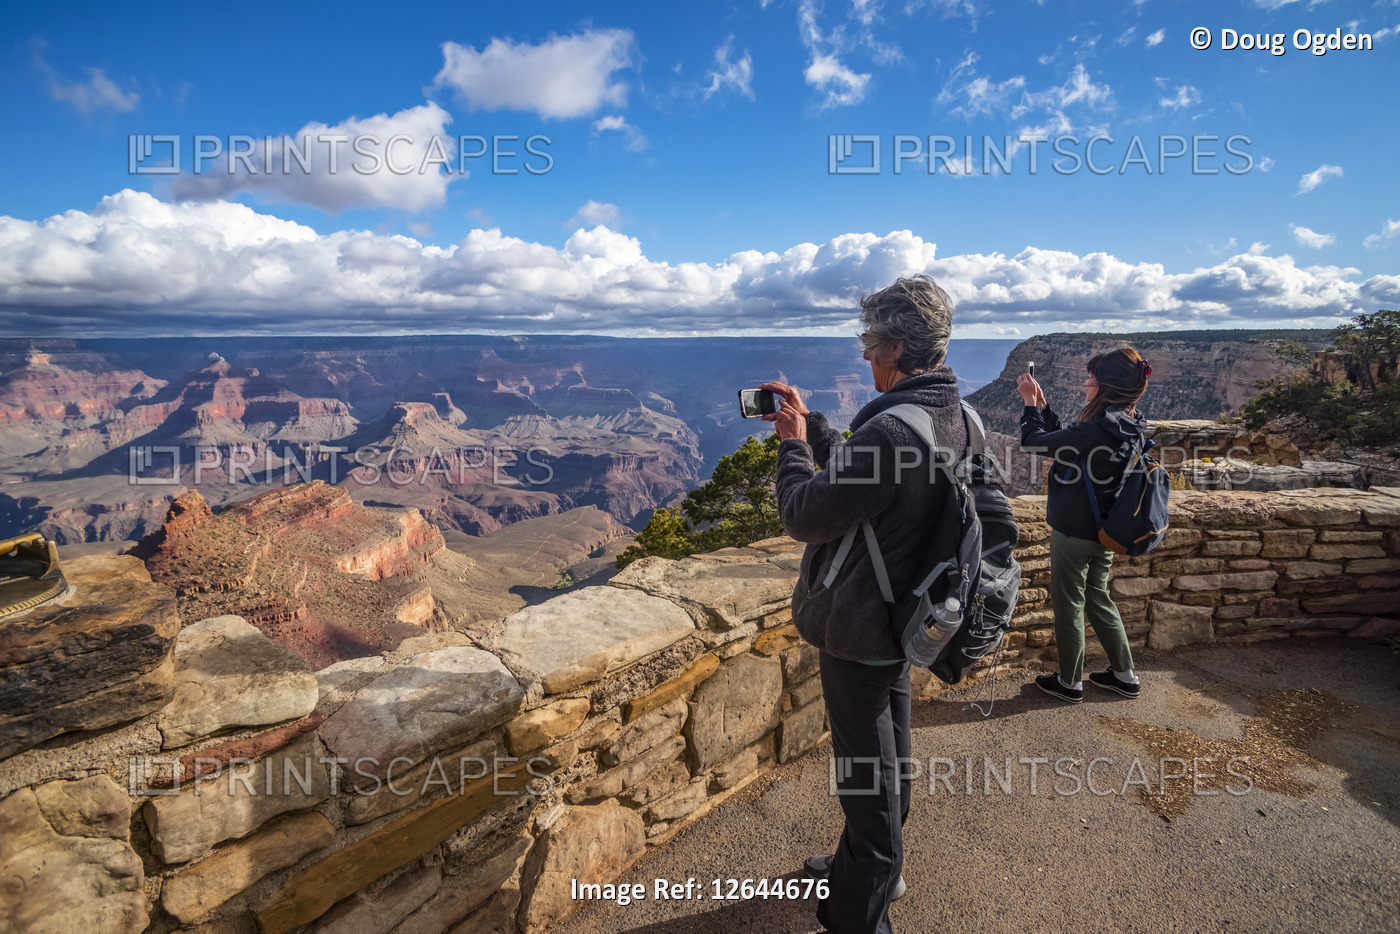 Tourists taking photos of the views of the Grand Canyon from the Rim Trail near ...